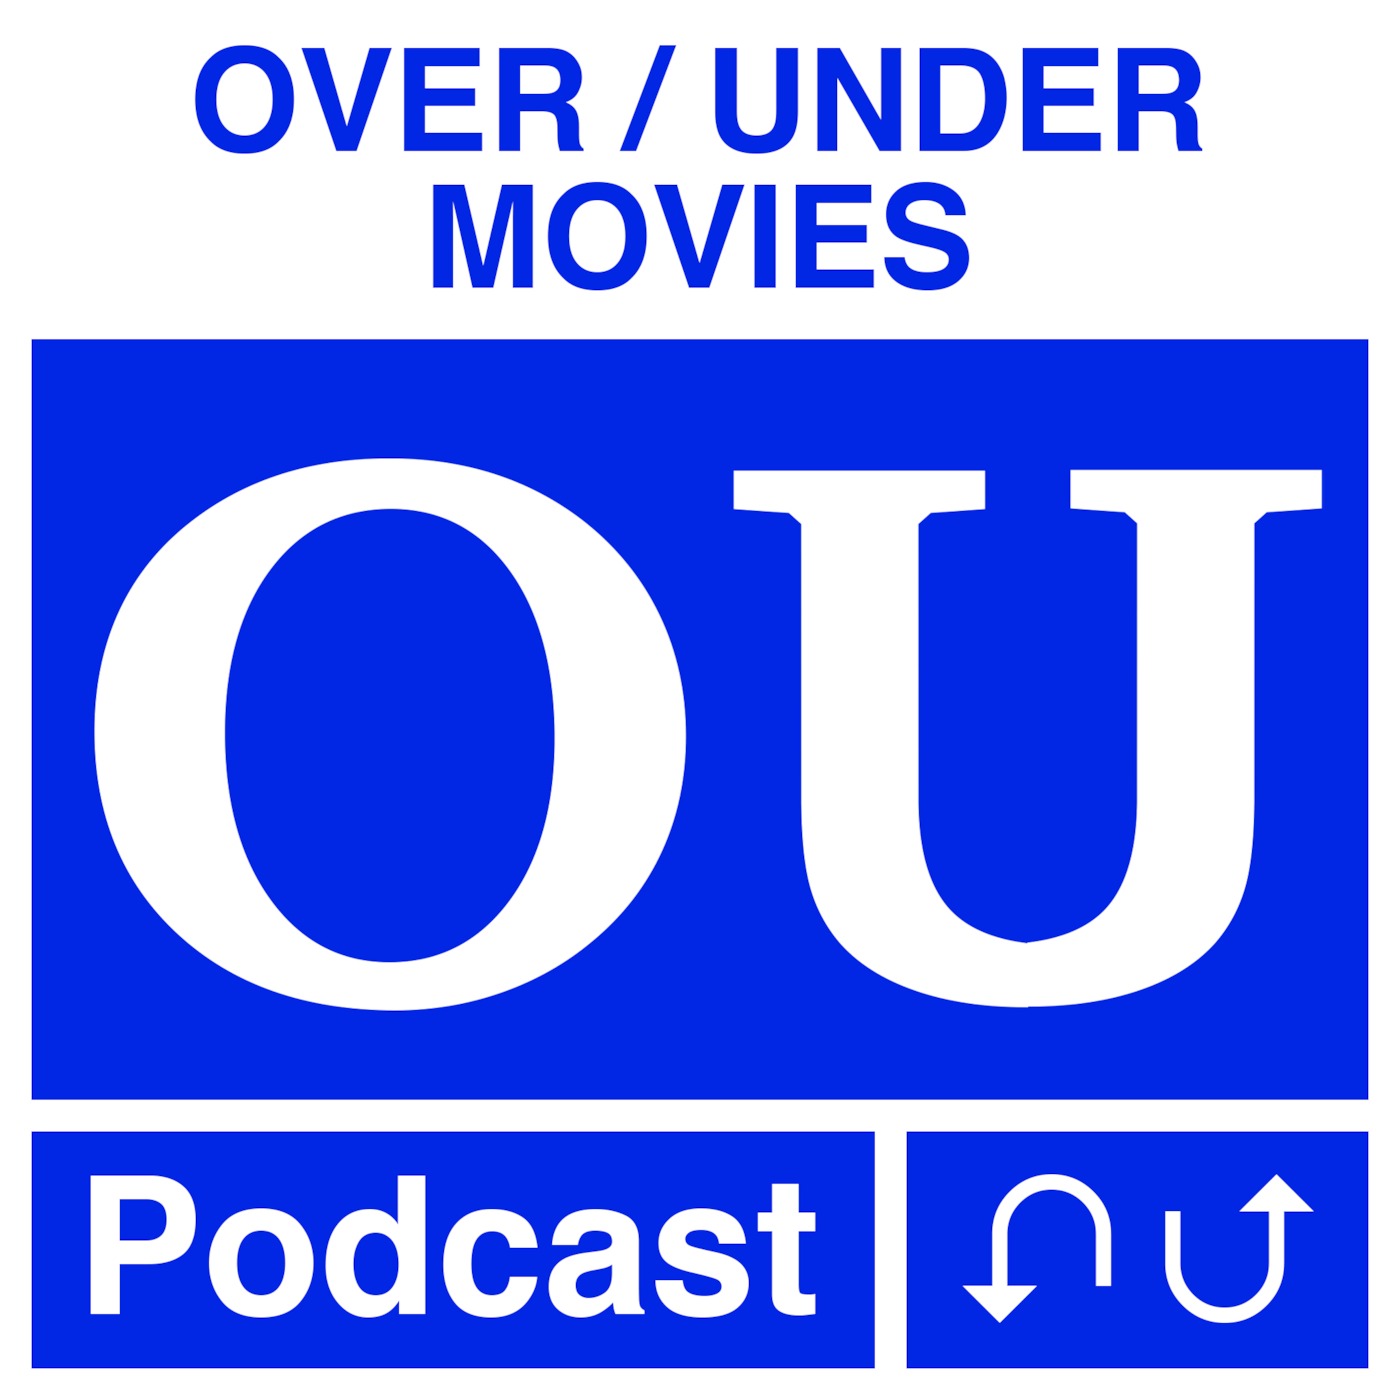 Over/Under Movies